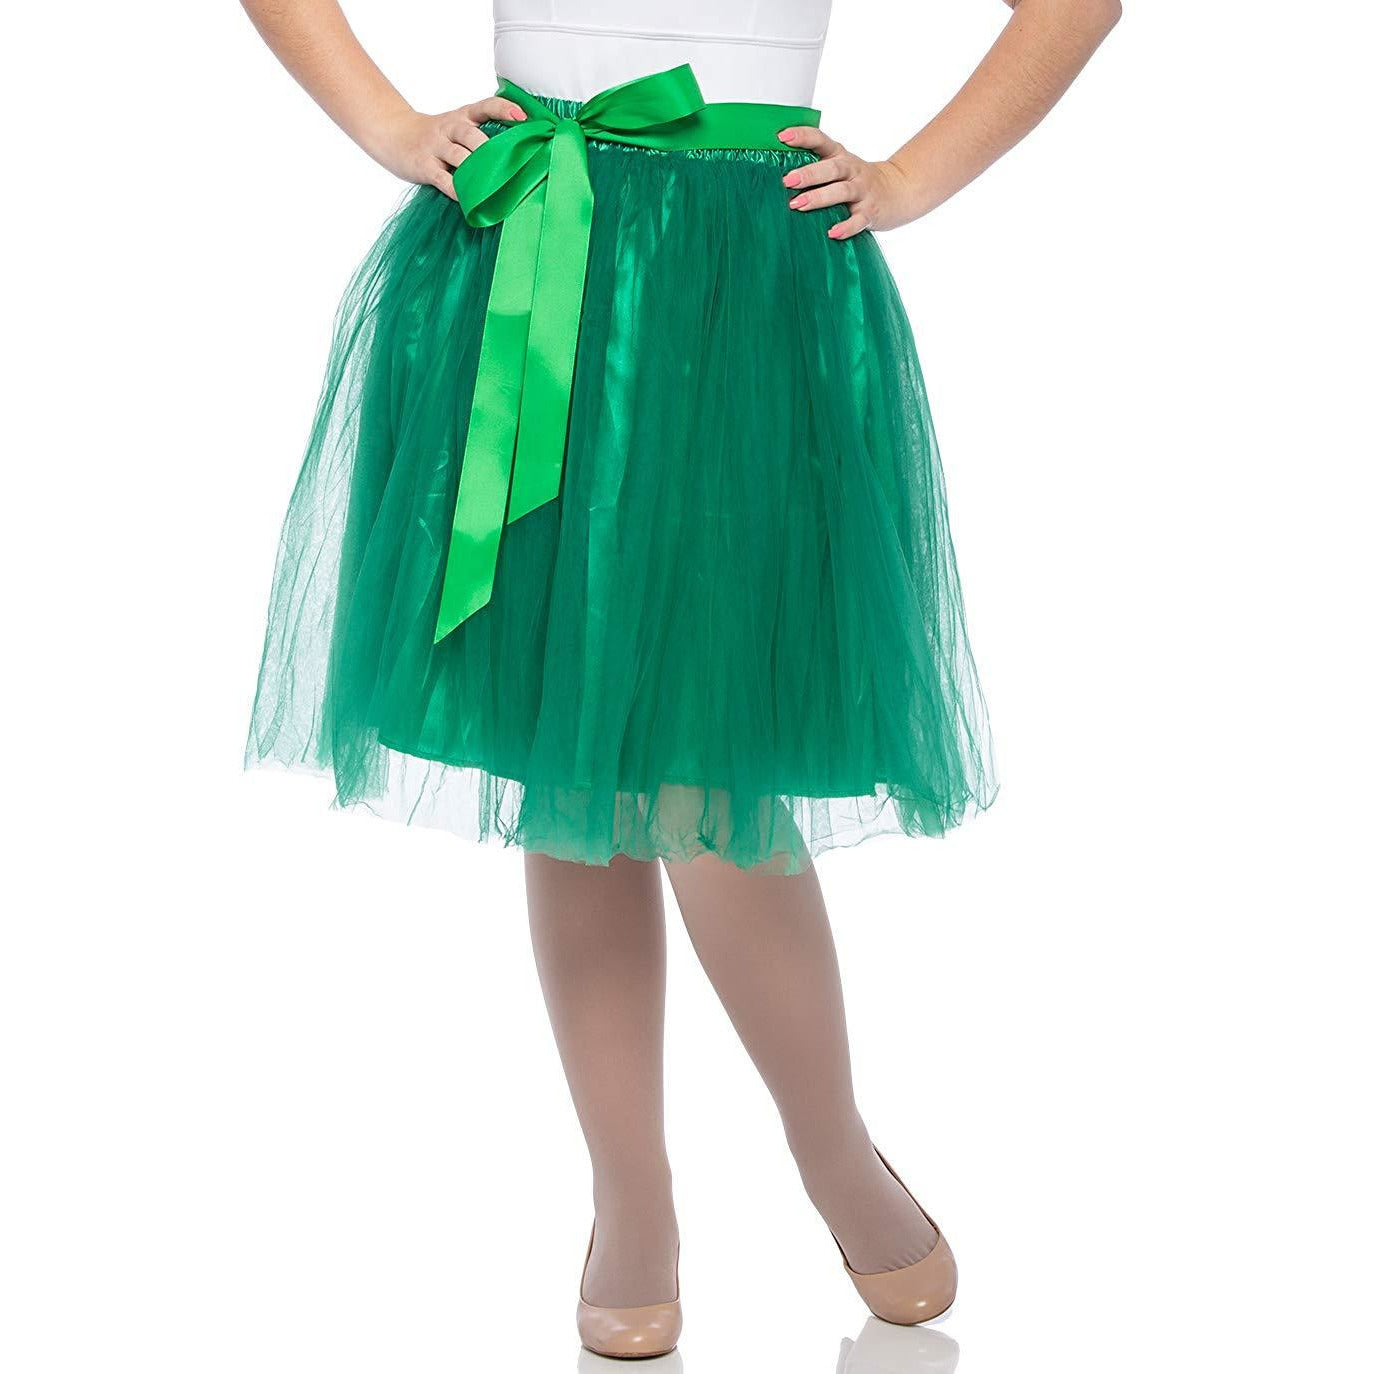 Adults & Girls A-line Knee Length Tutu Tulle Skirt - Regular and Plus Size in Green